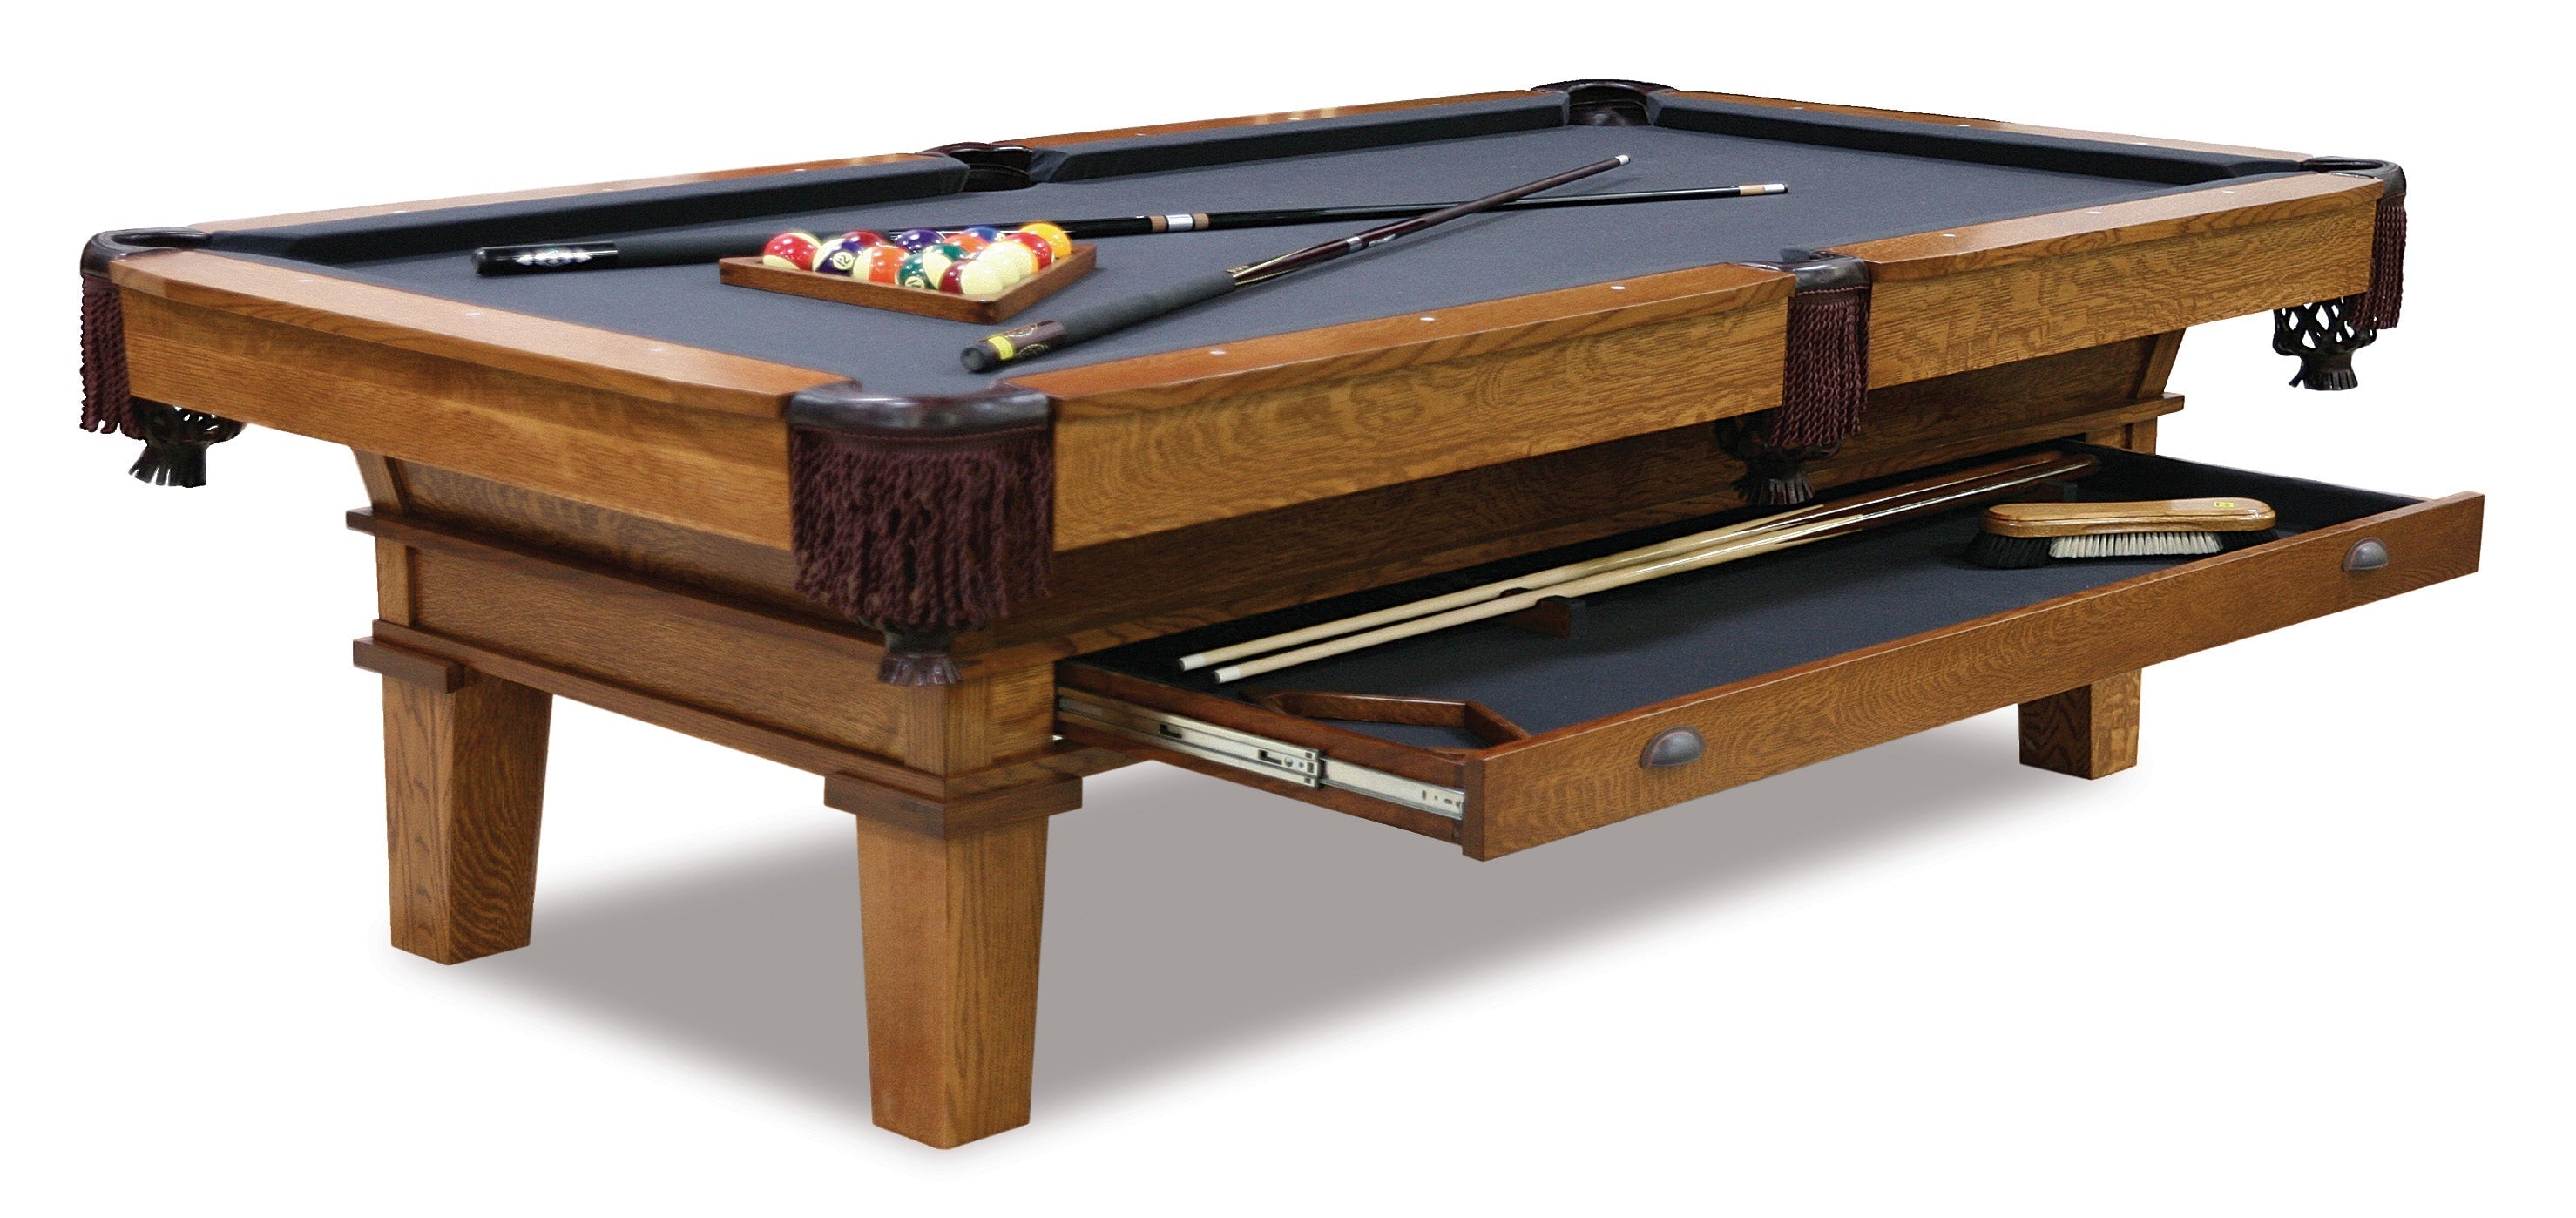 7' Hand-crafted Monroe Pool Table (Cherry)